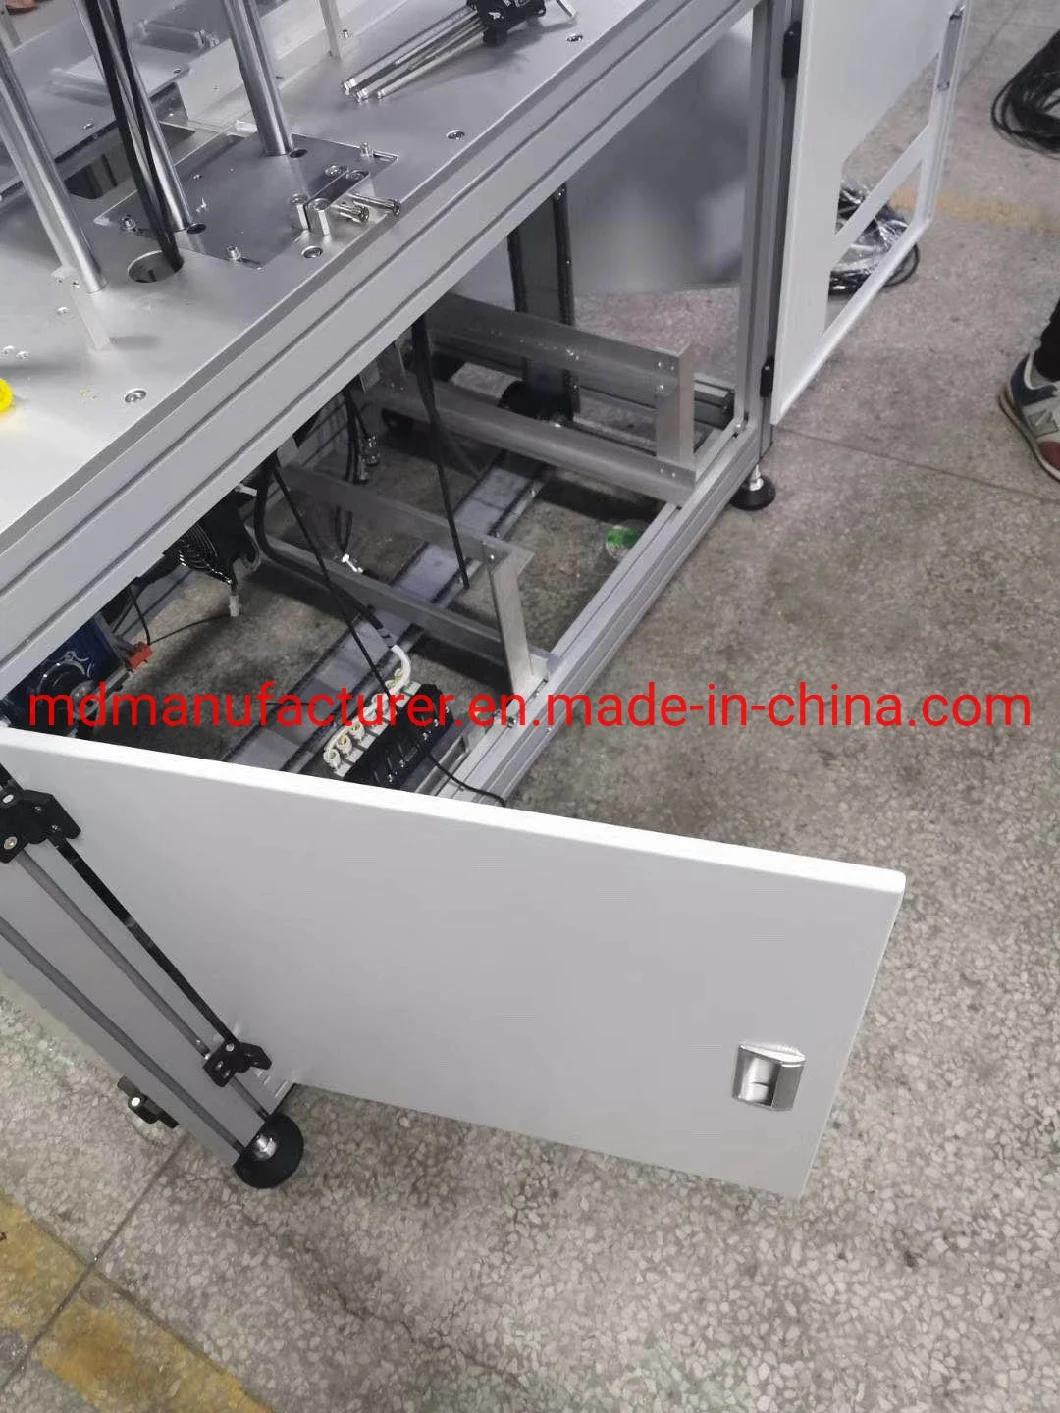 Medical Non Woven Face Mask Machine for Sale